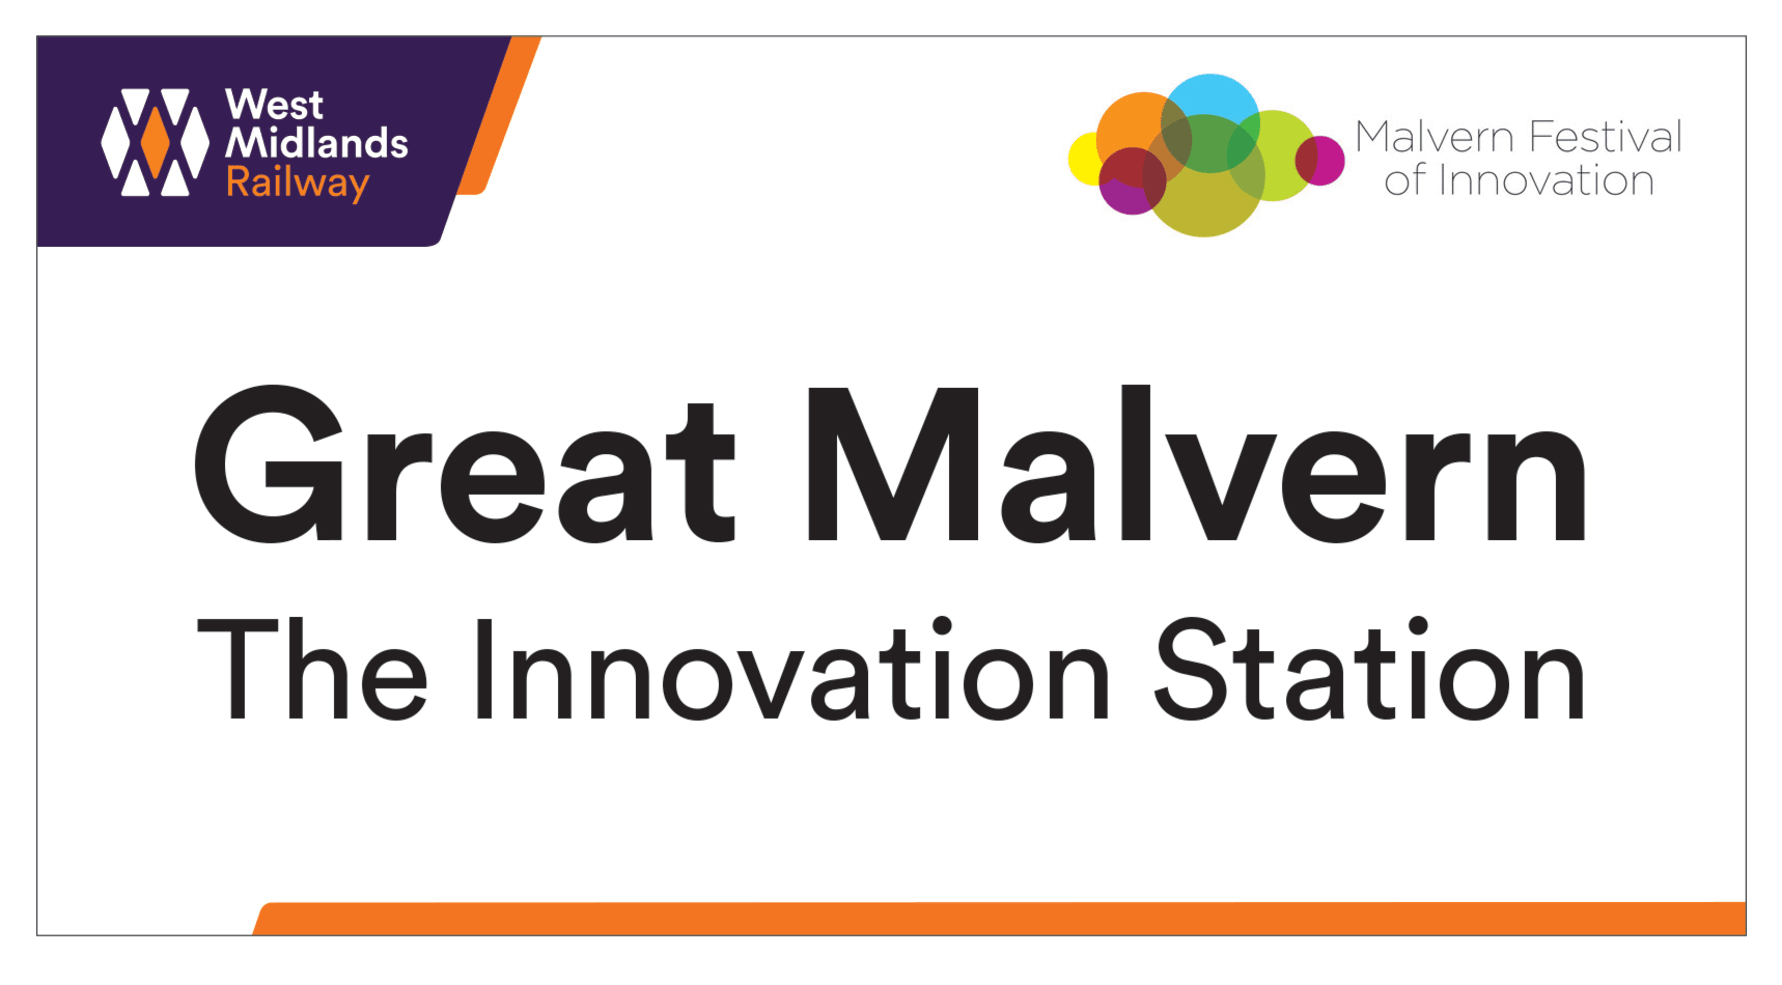 Great Malvern to become the home of innovation during annual technology festival